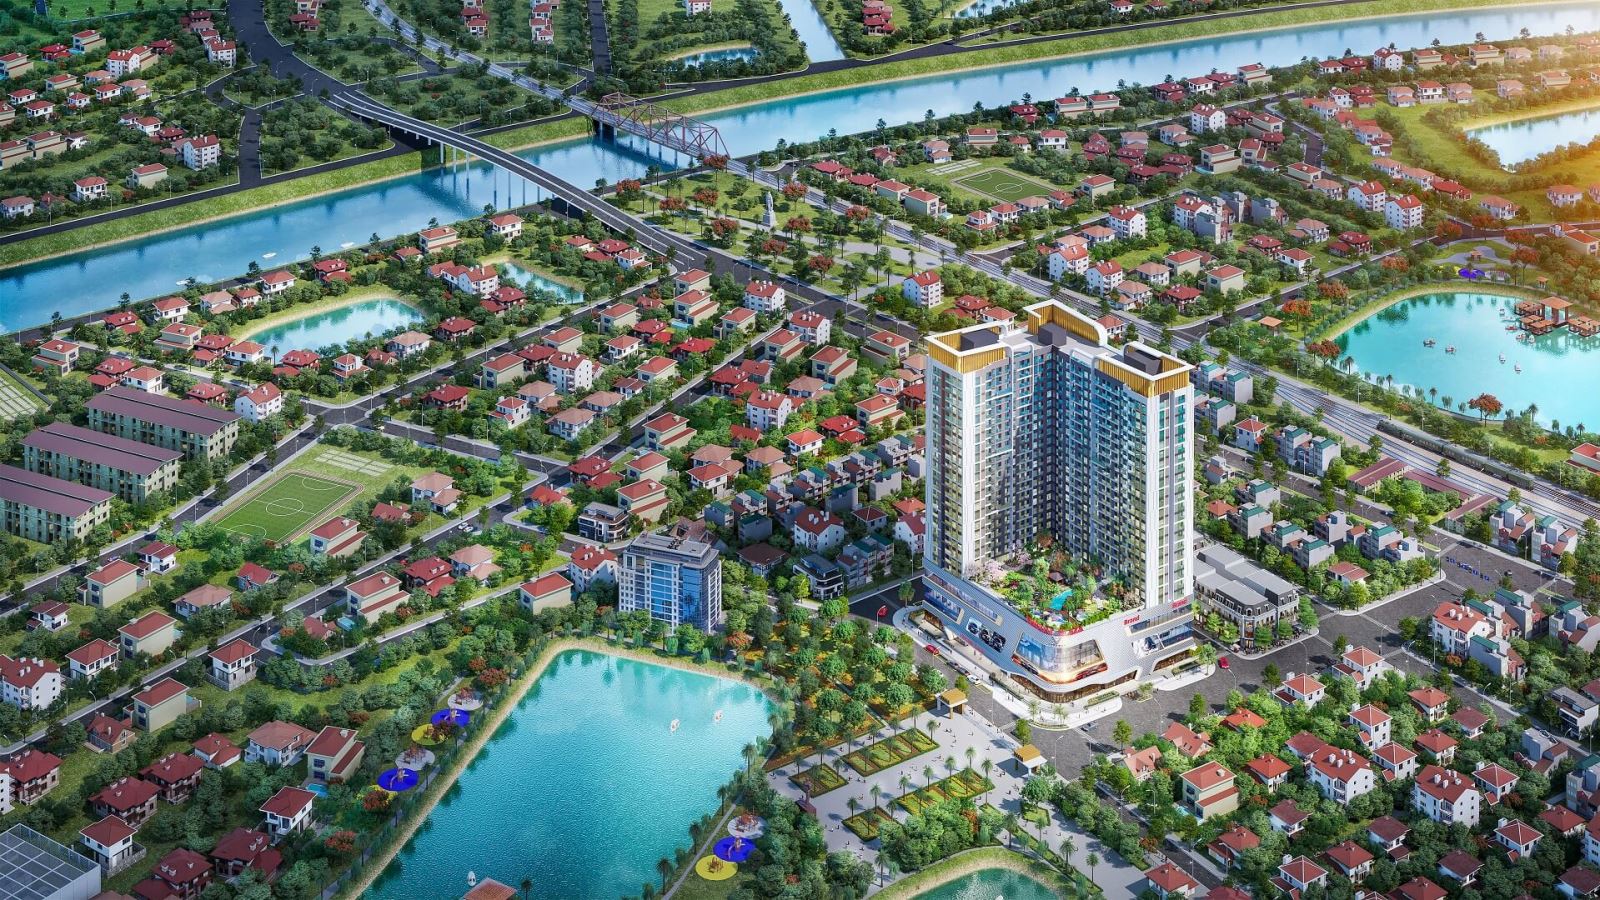 The opening for sale of Vinhomes Sky Park Bac Giang apartments